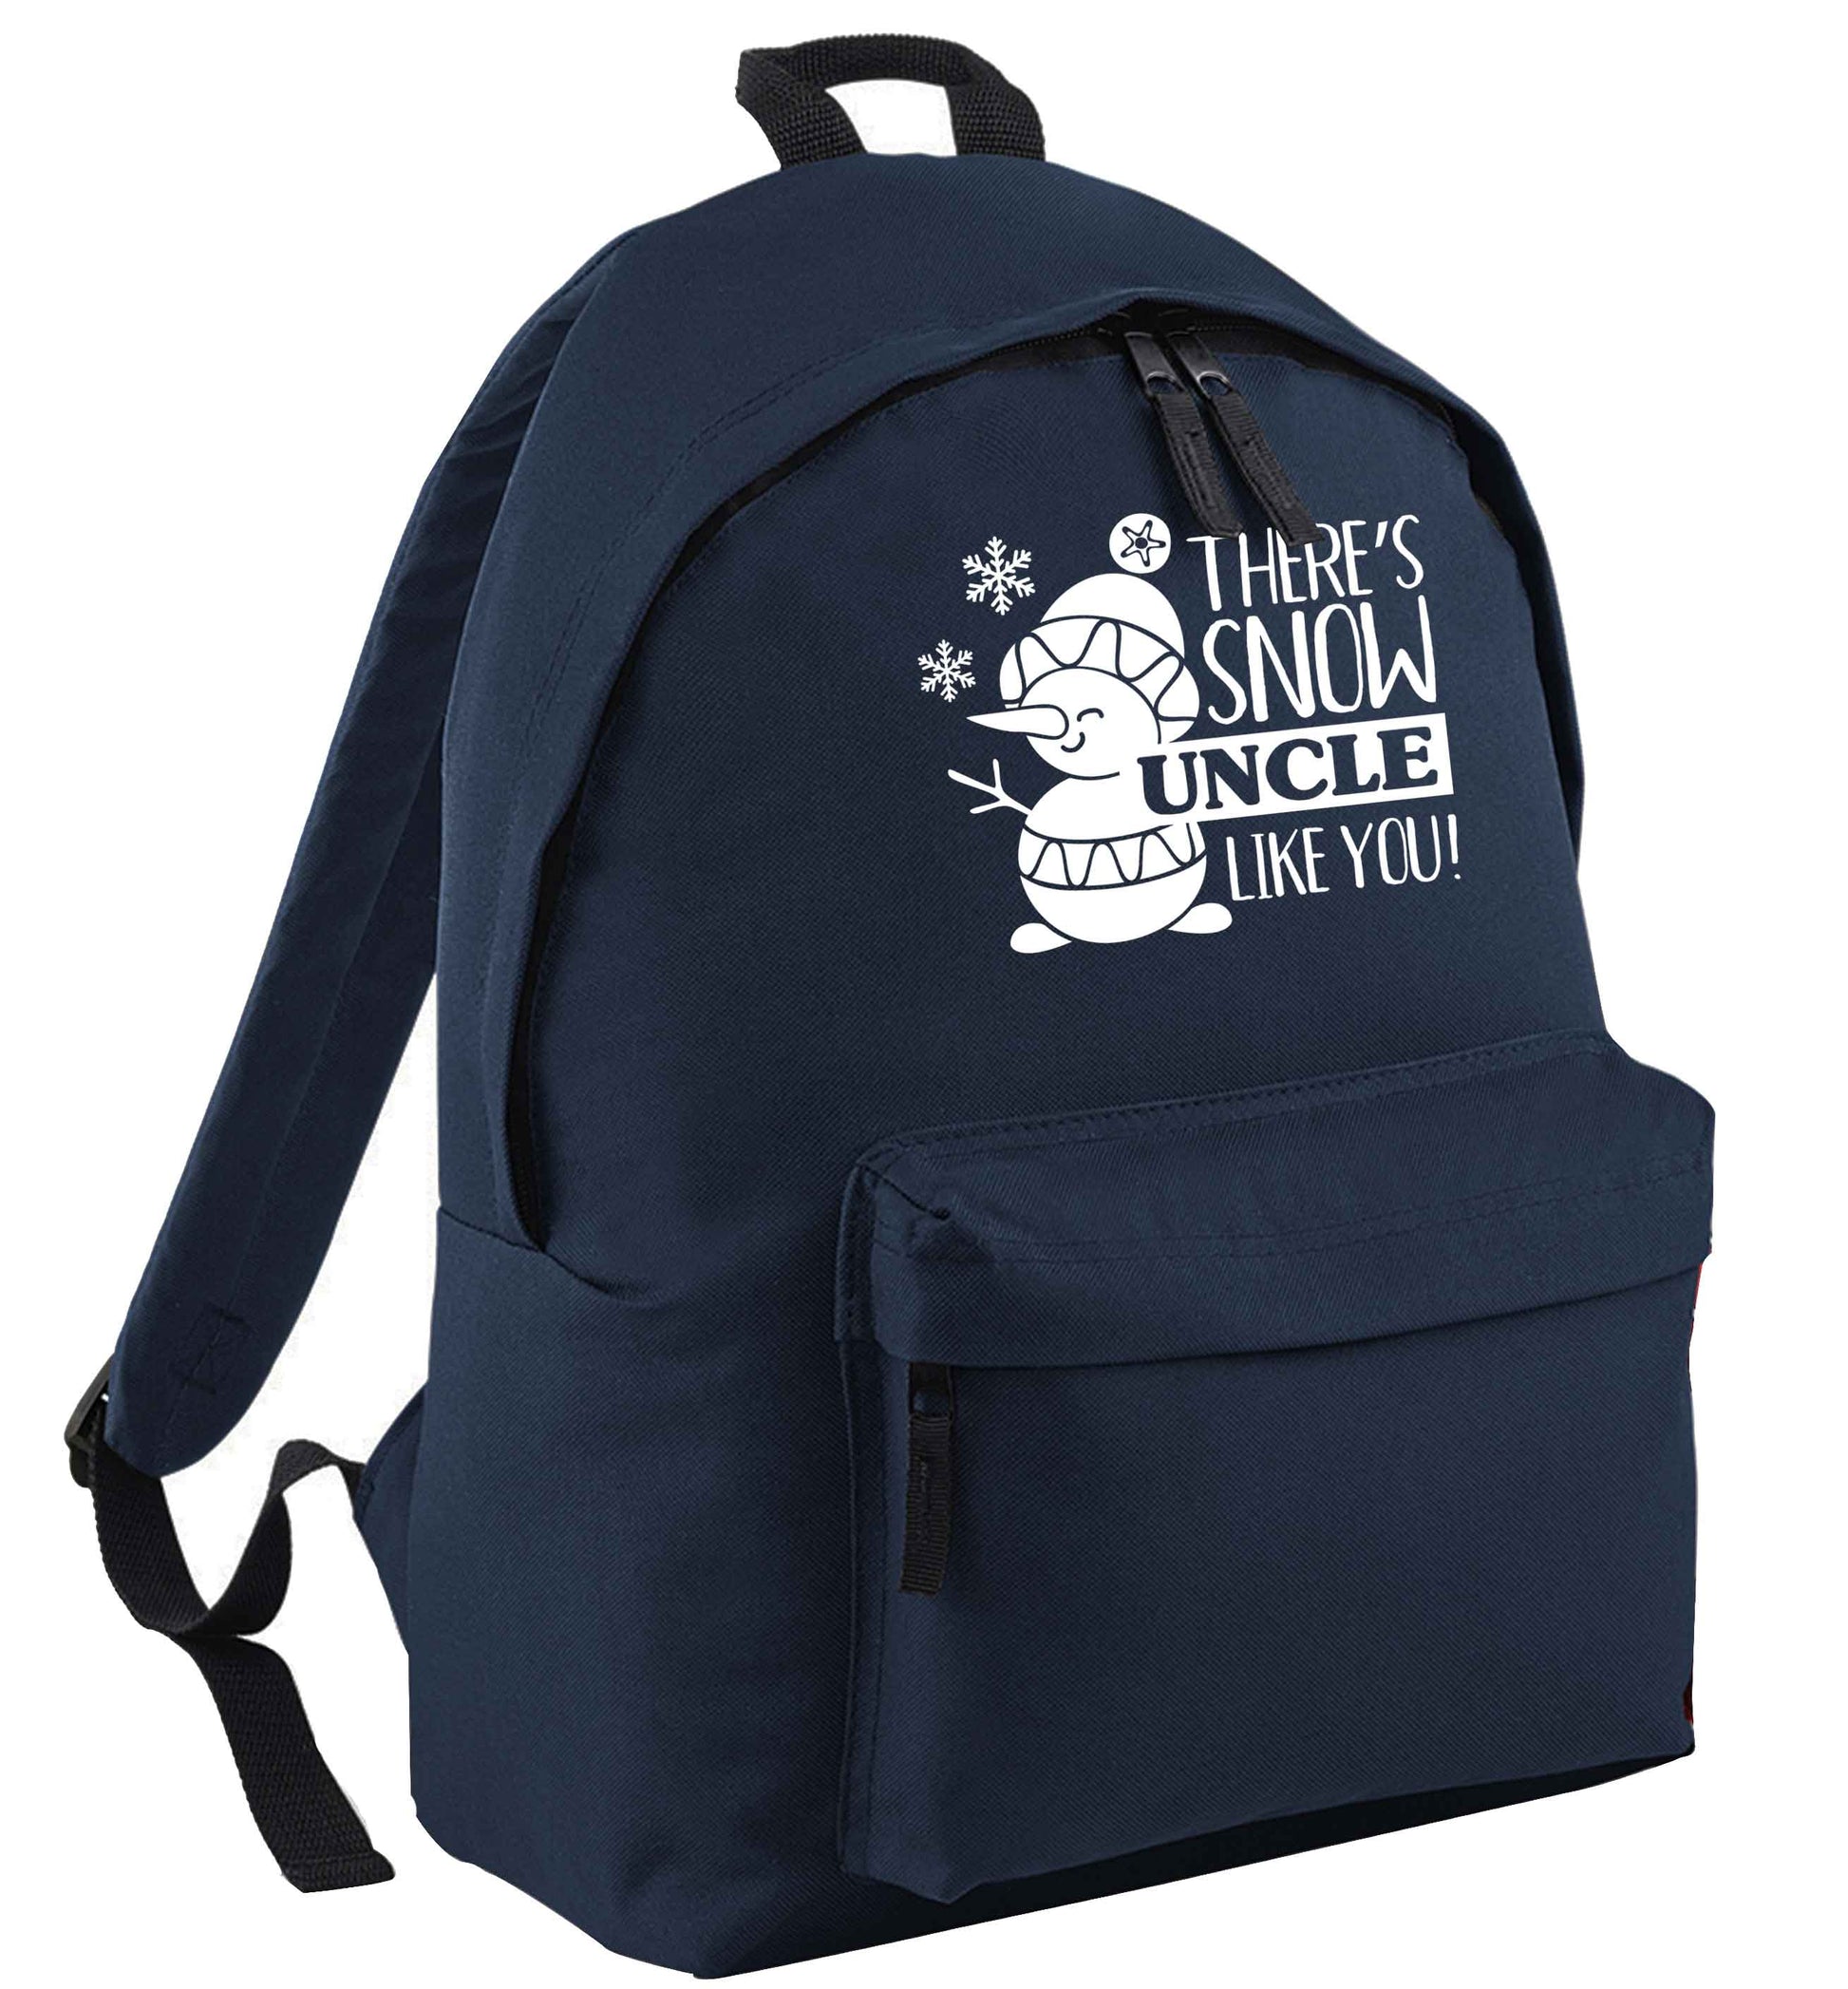 There's snow uncle like you navy adults backpack